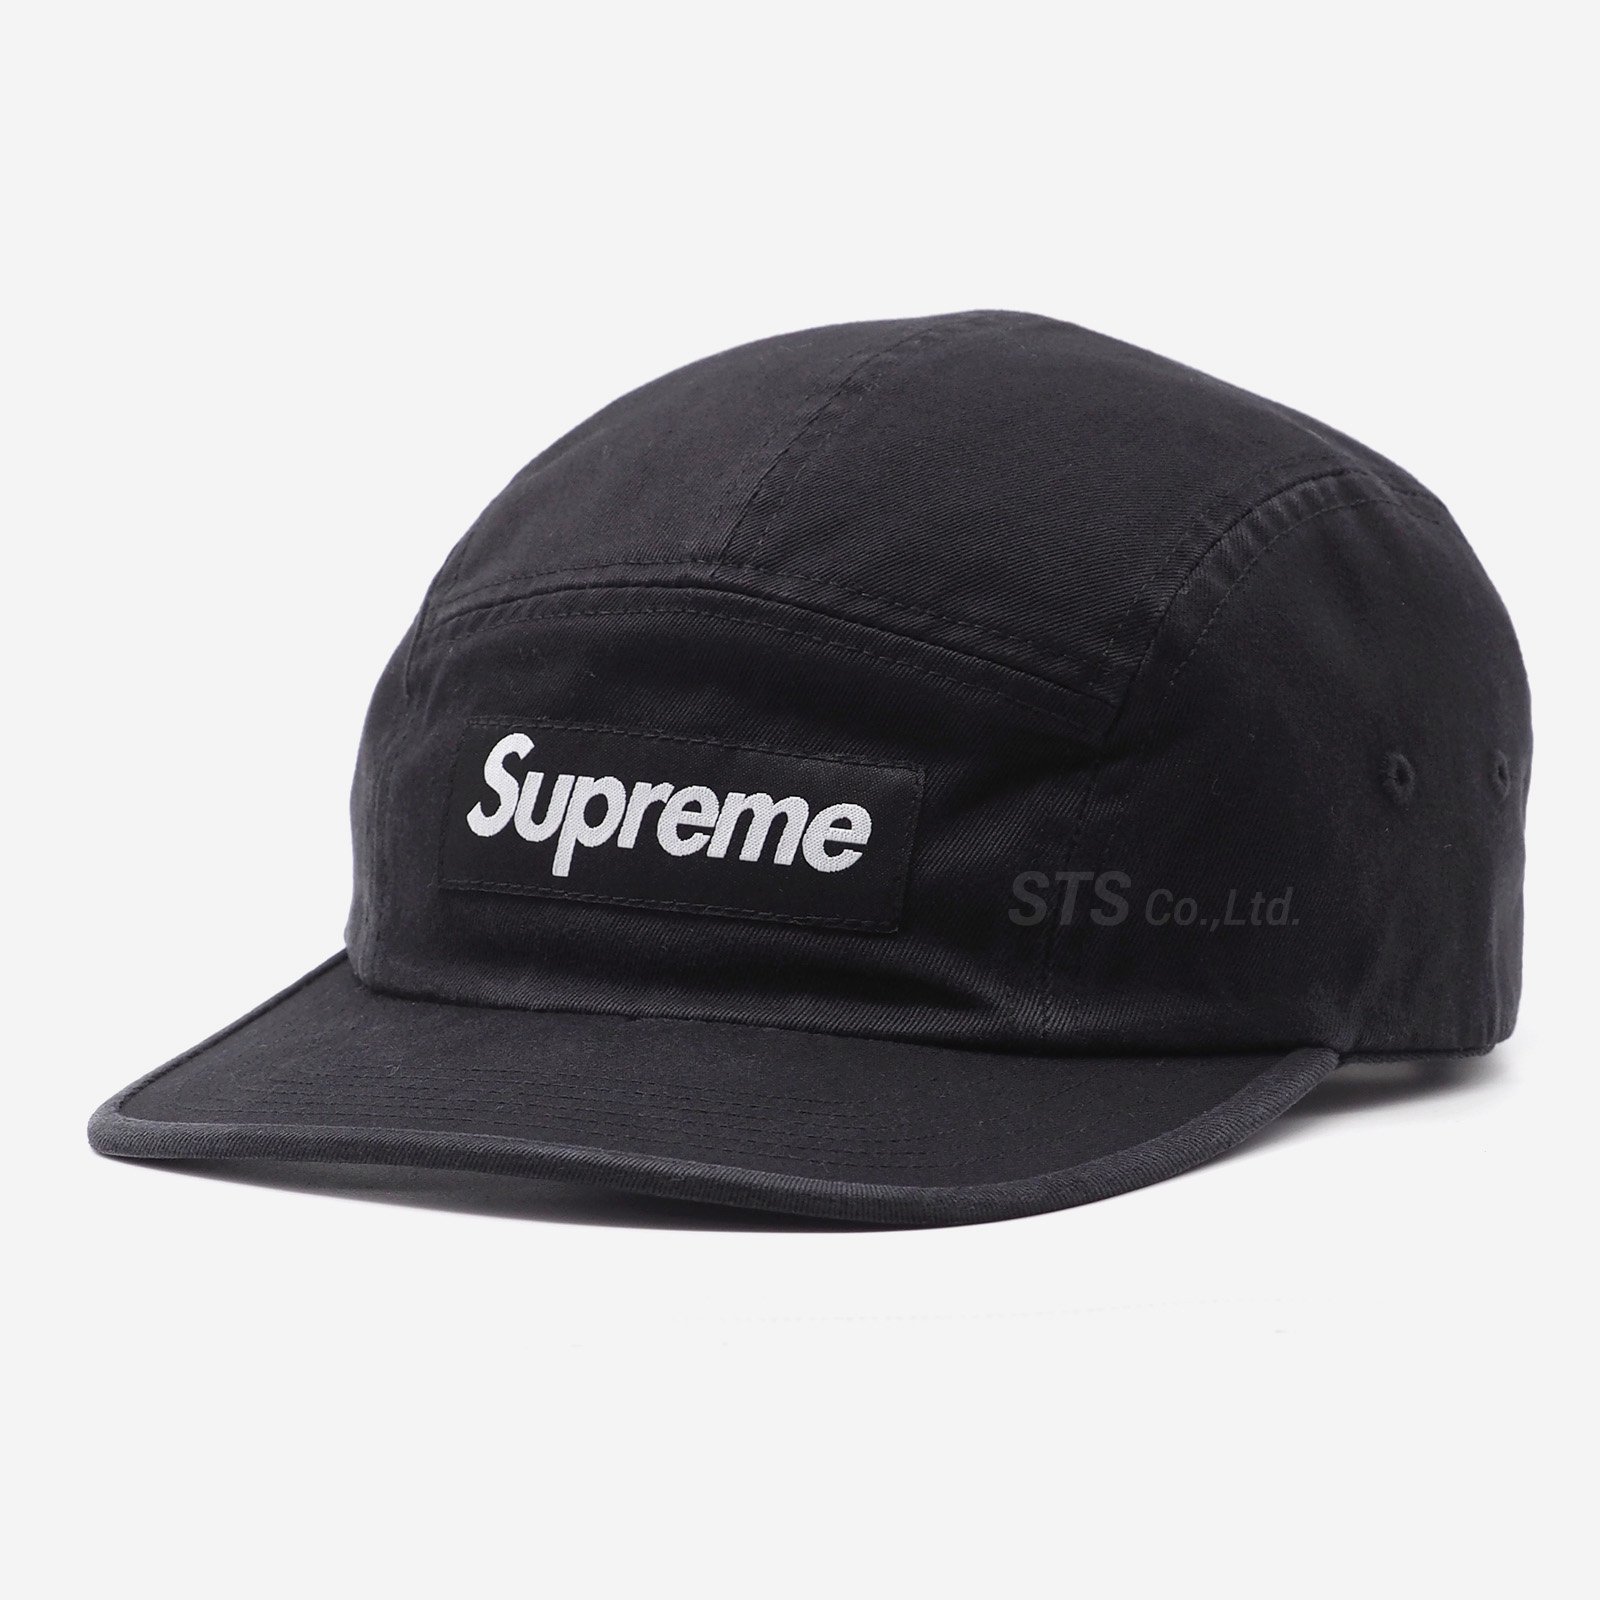 supreme Washed Chino Twill Camp Cap キャップ